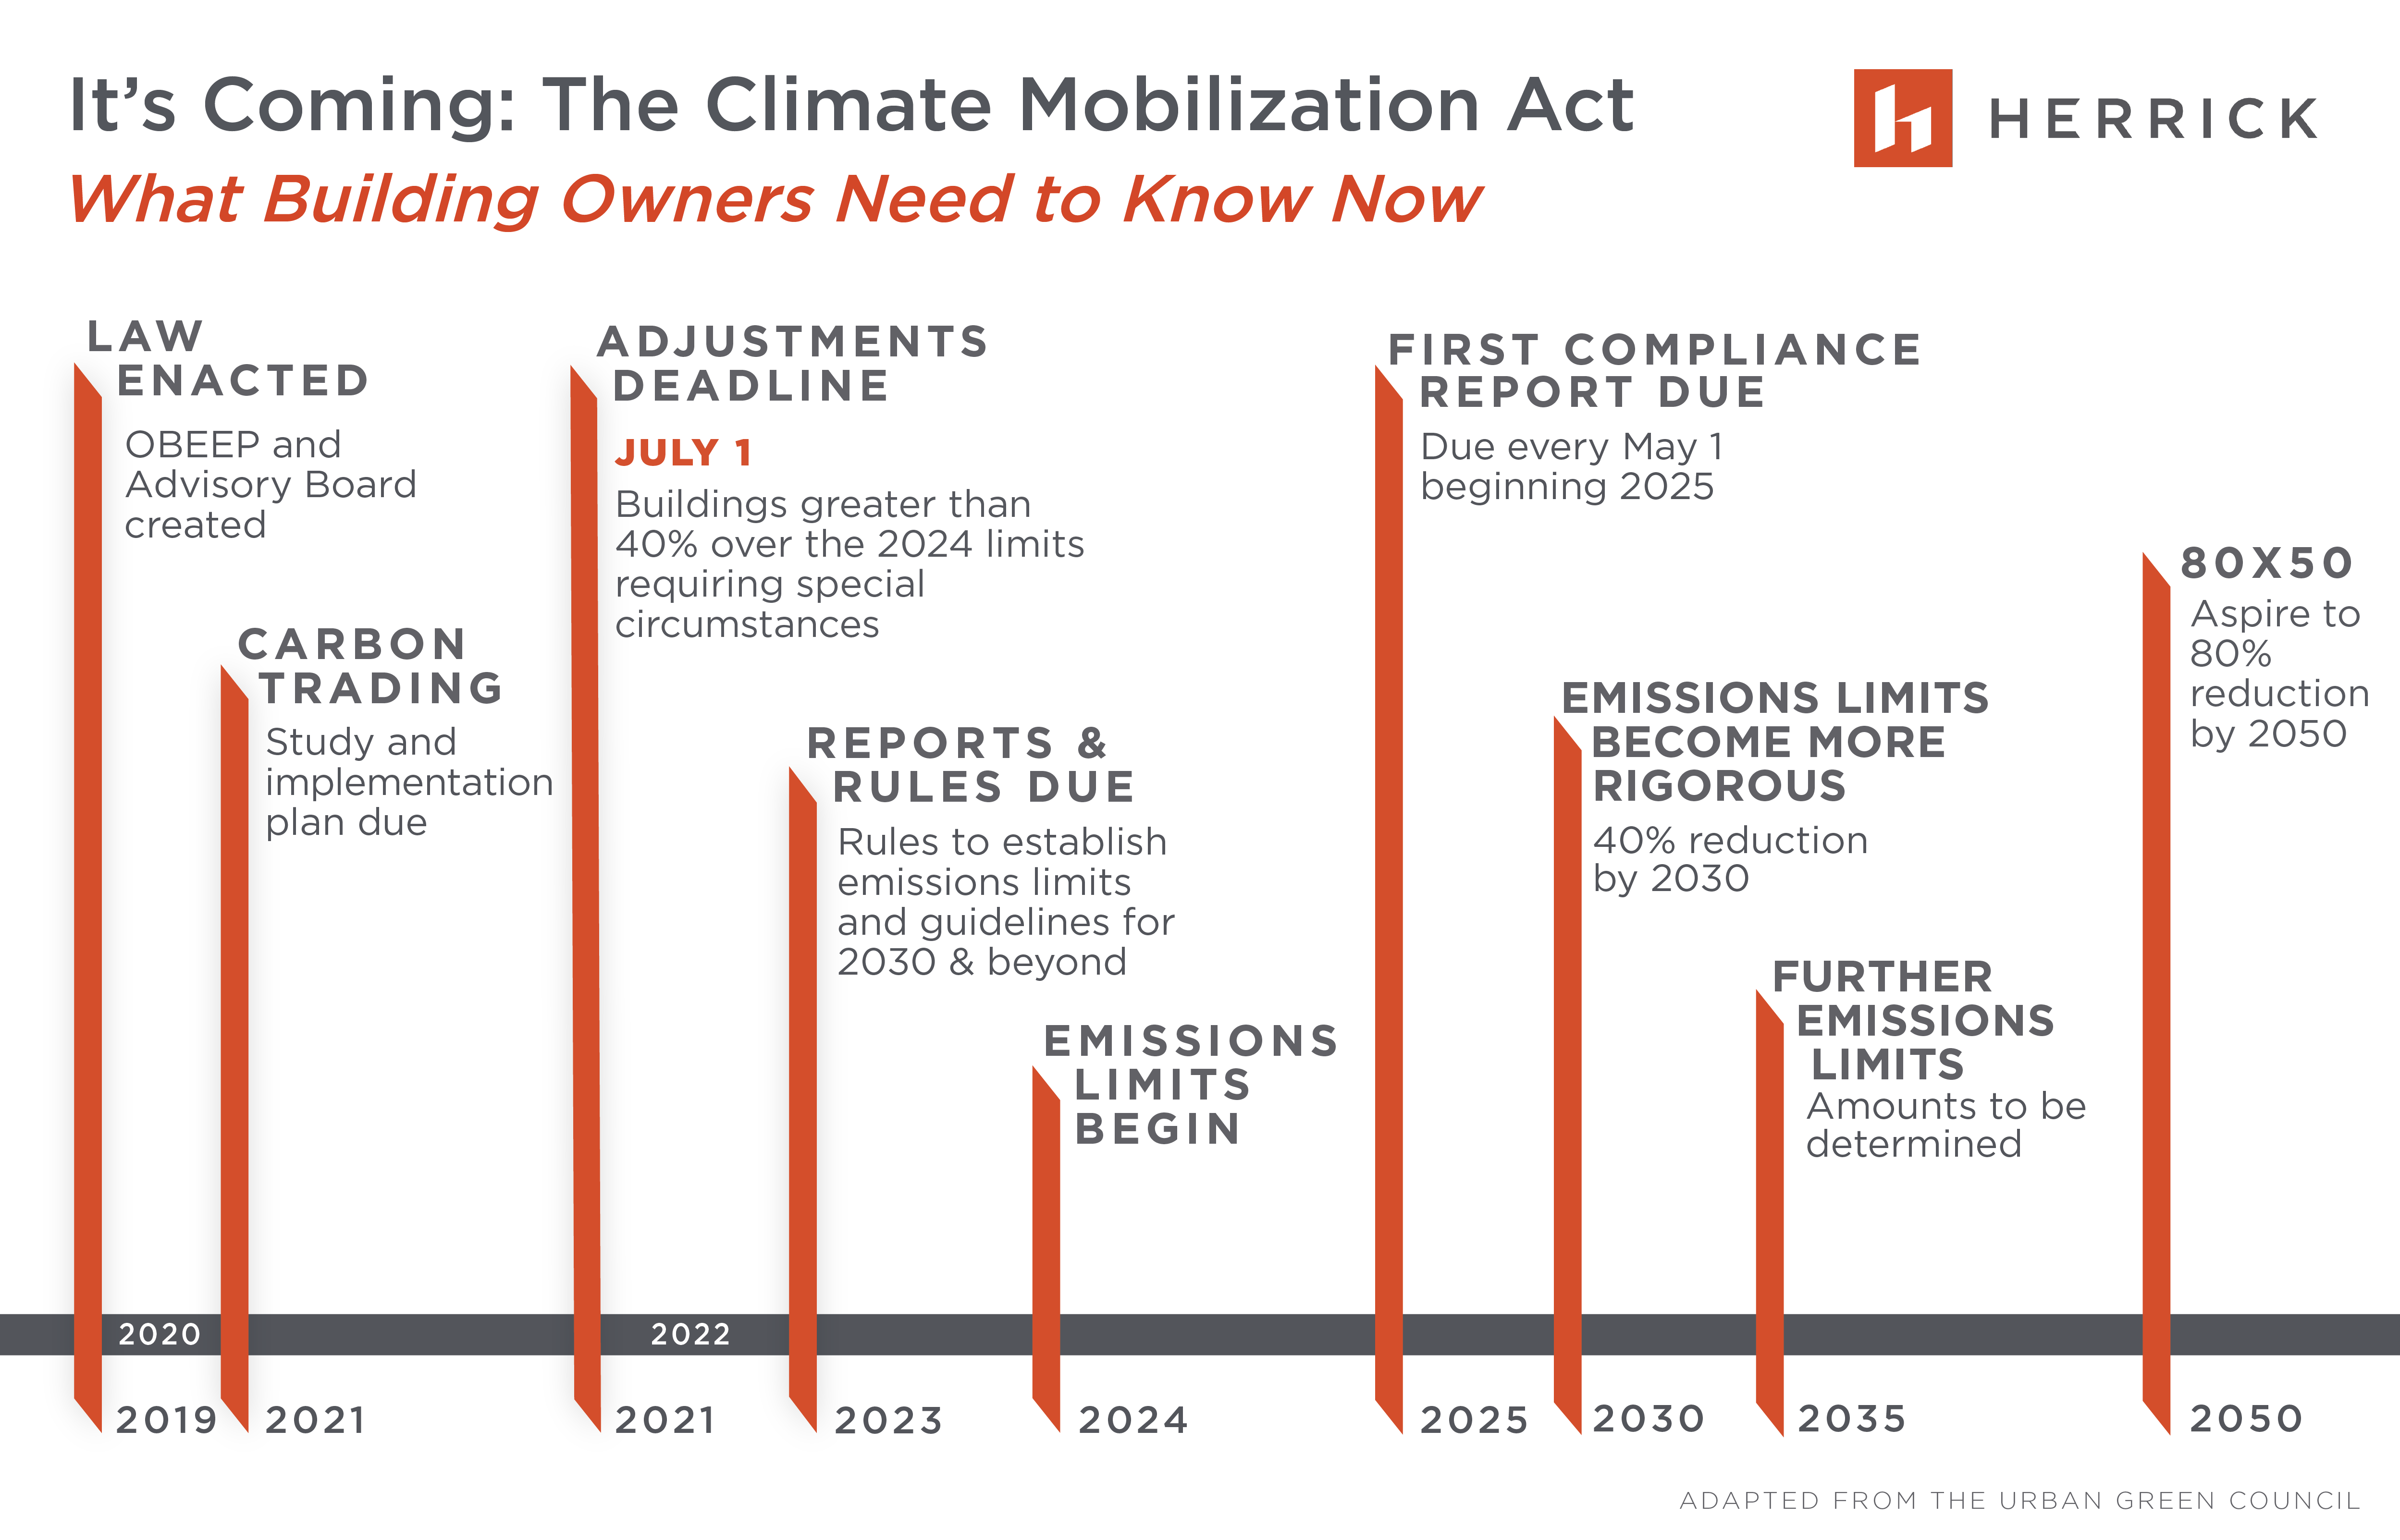 Herrick Climate Mobilization Act